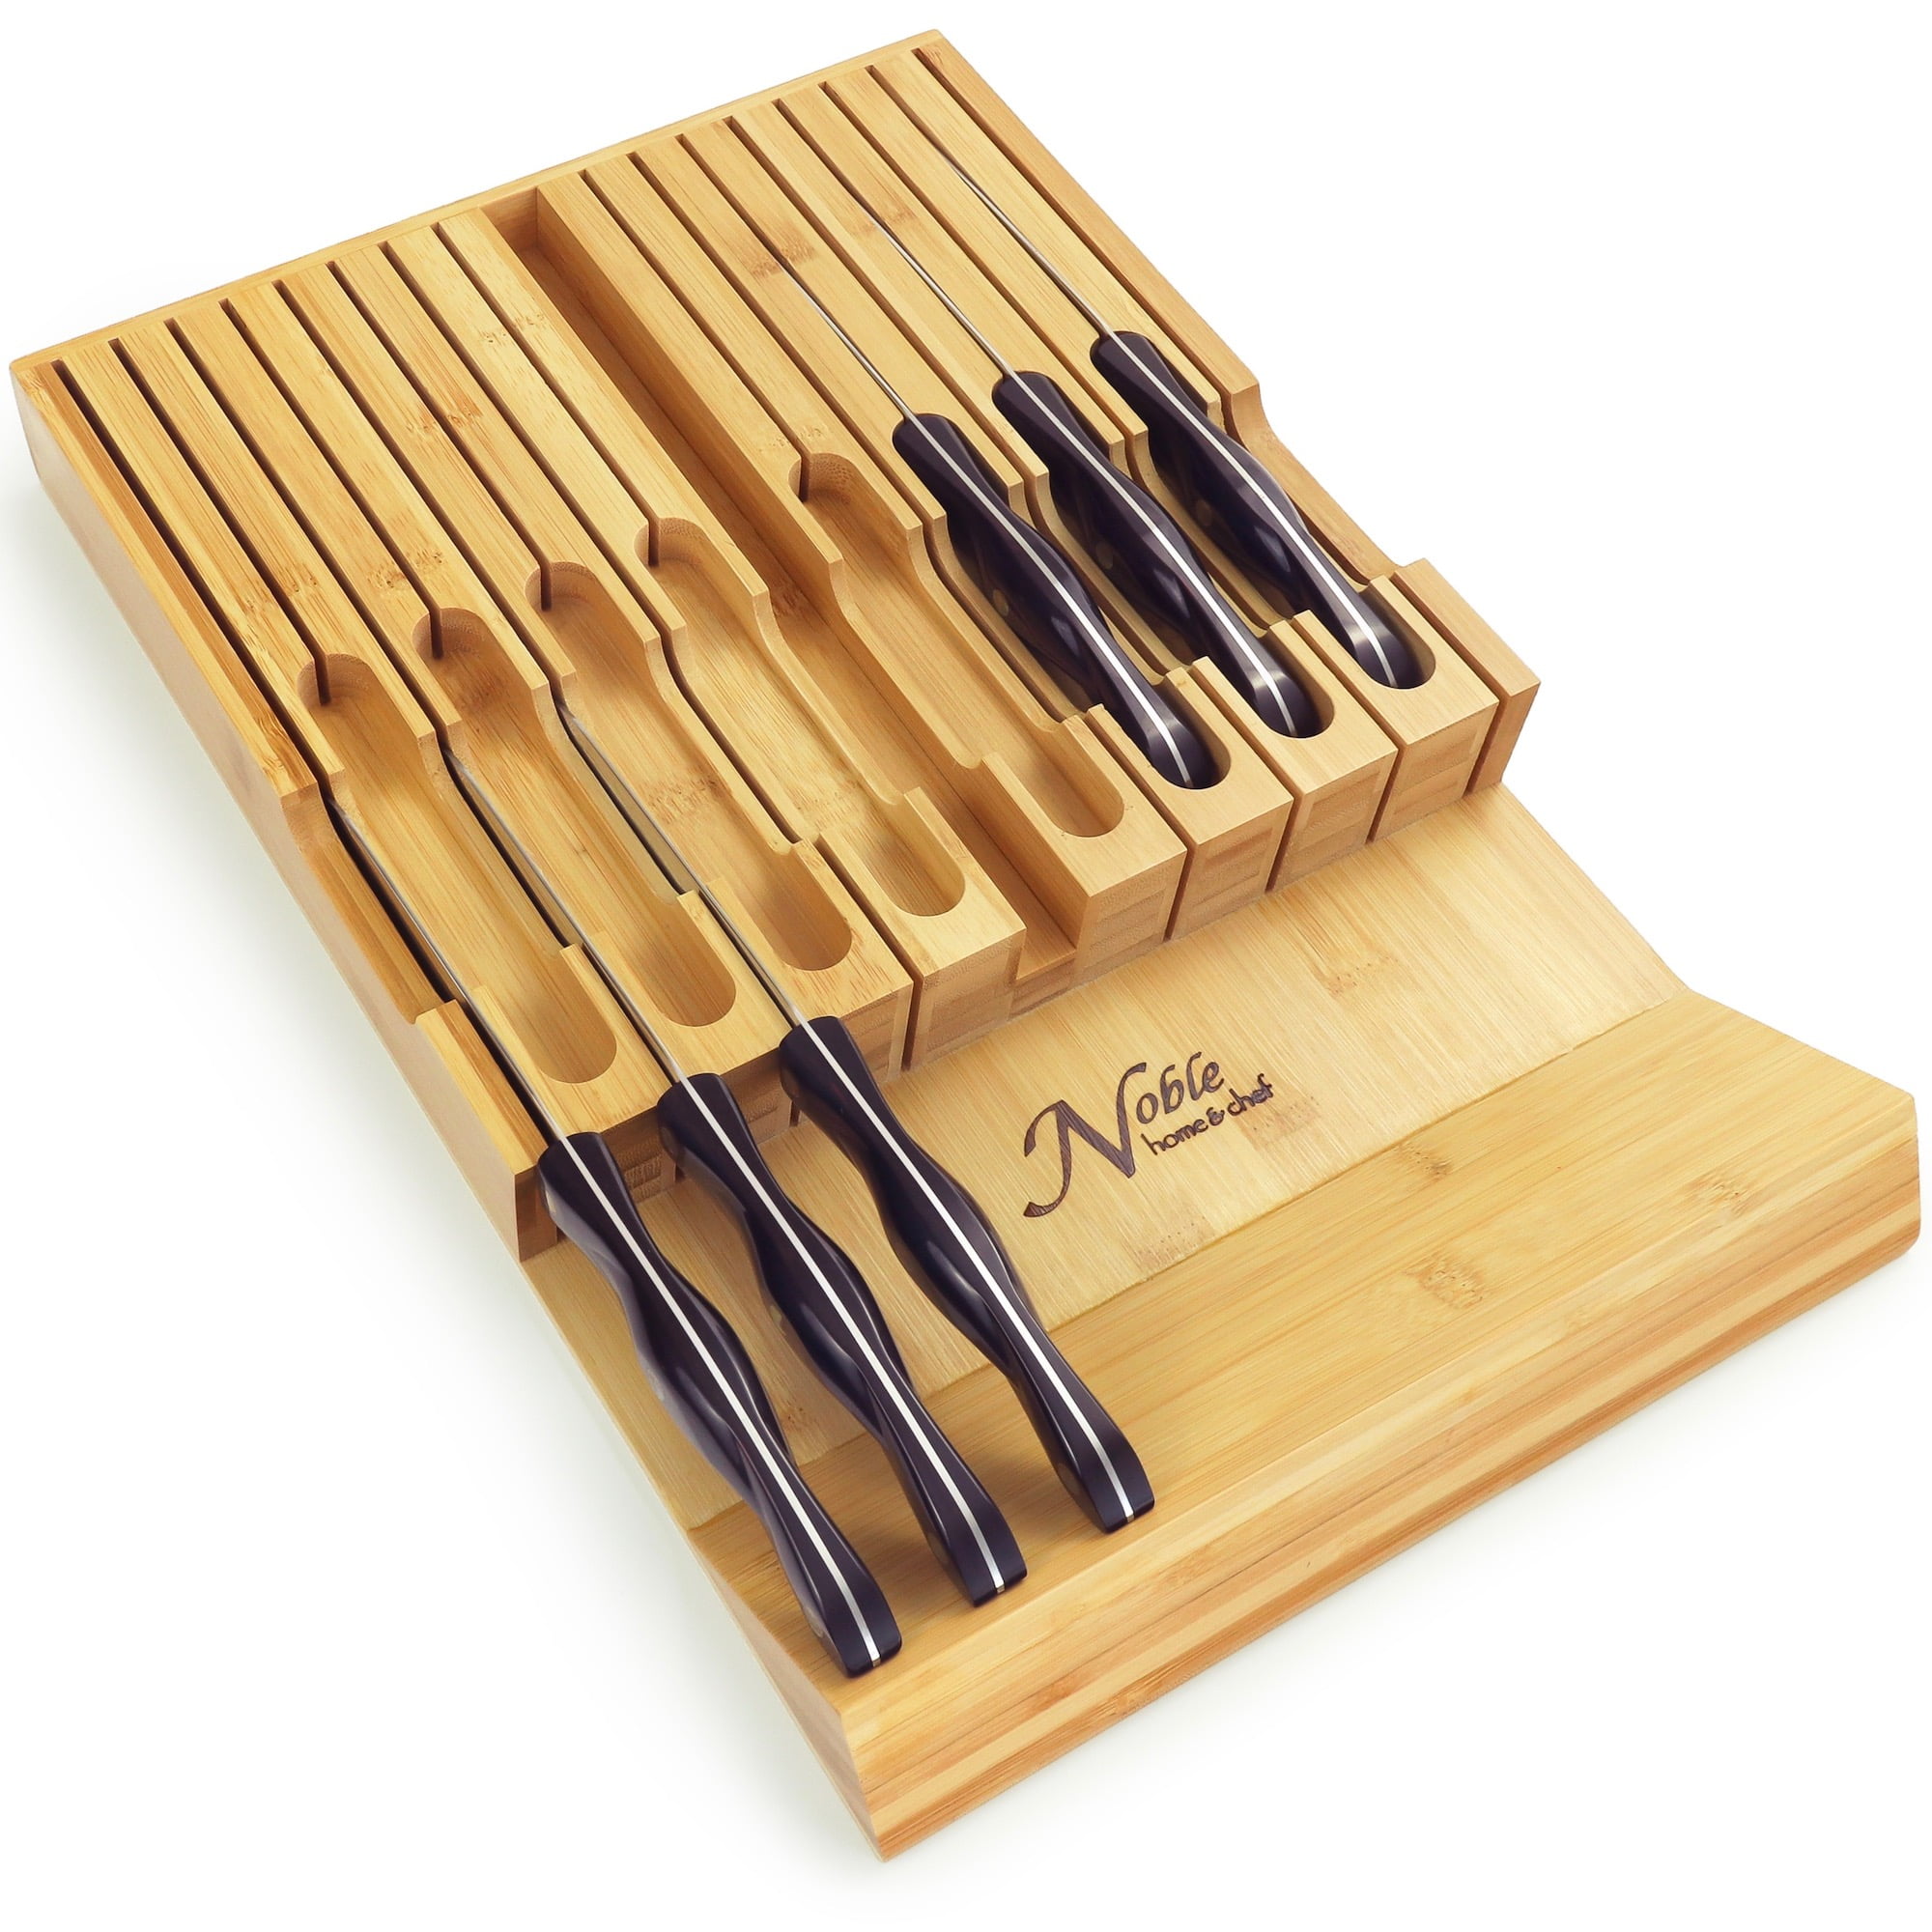 NIUXX in-Drawer Knife Block with 16 Knives, Bamboo Knife Organizer for  Steak Knives, Chef Knives and Sharpener, Cutlery Holder with Detachable  Knife